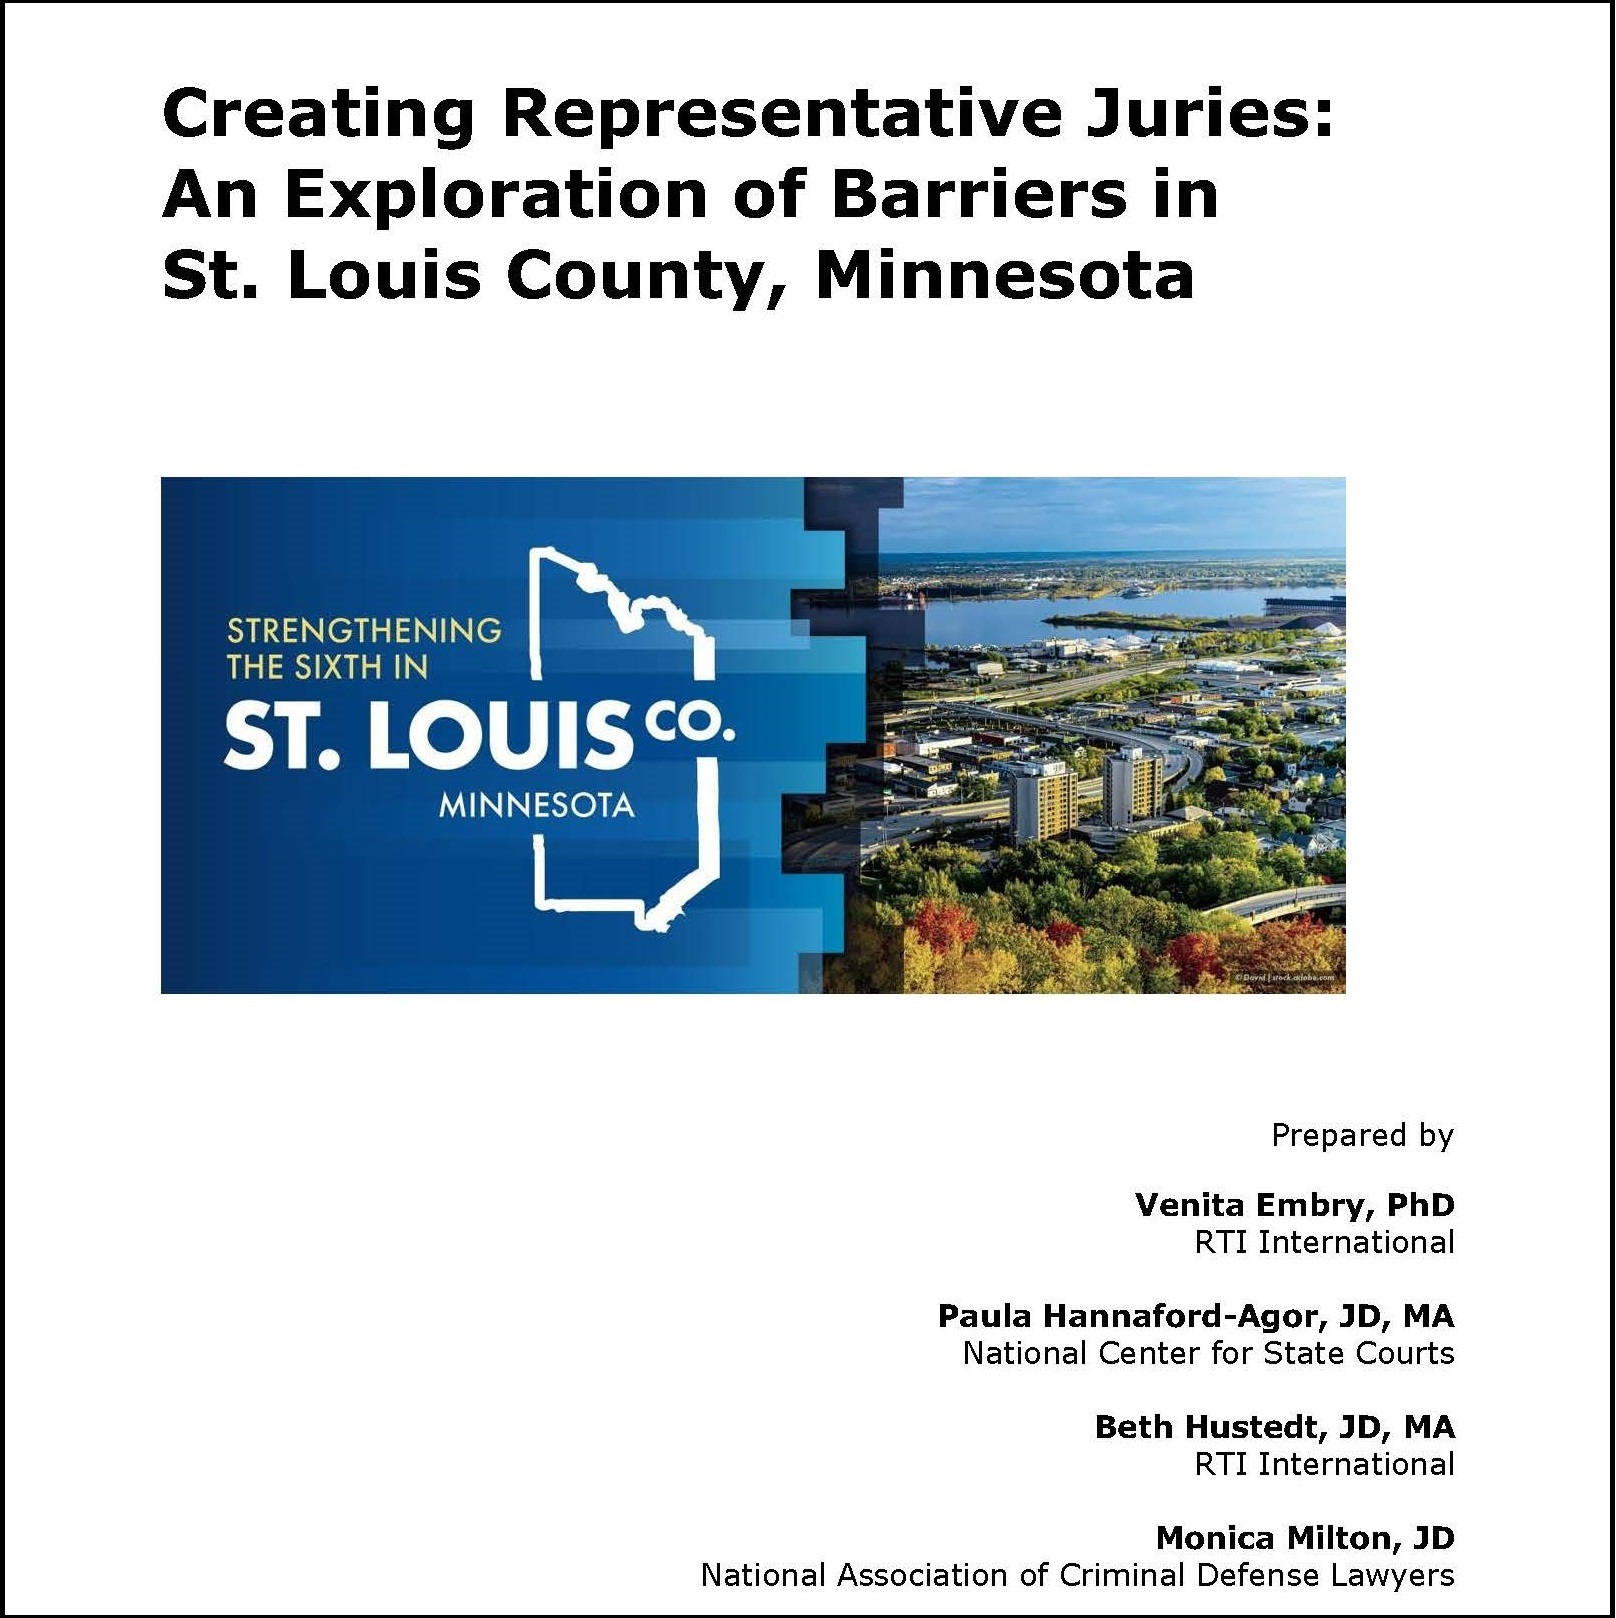 Report: Creating Representative Juries: An Exploration of Barriers in St. Louis County, MN